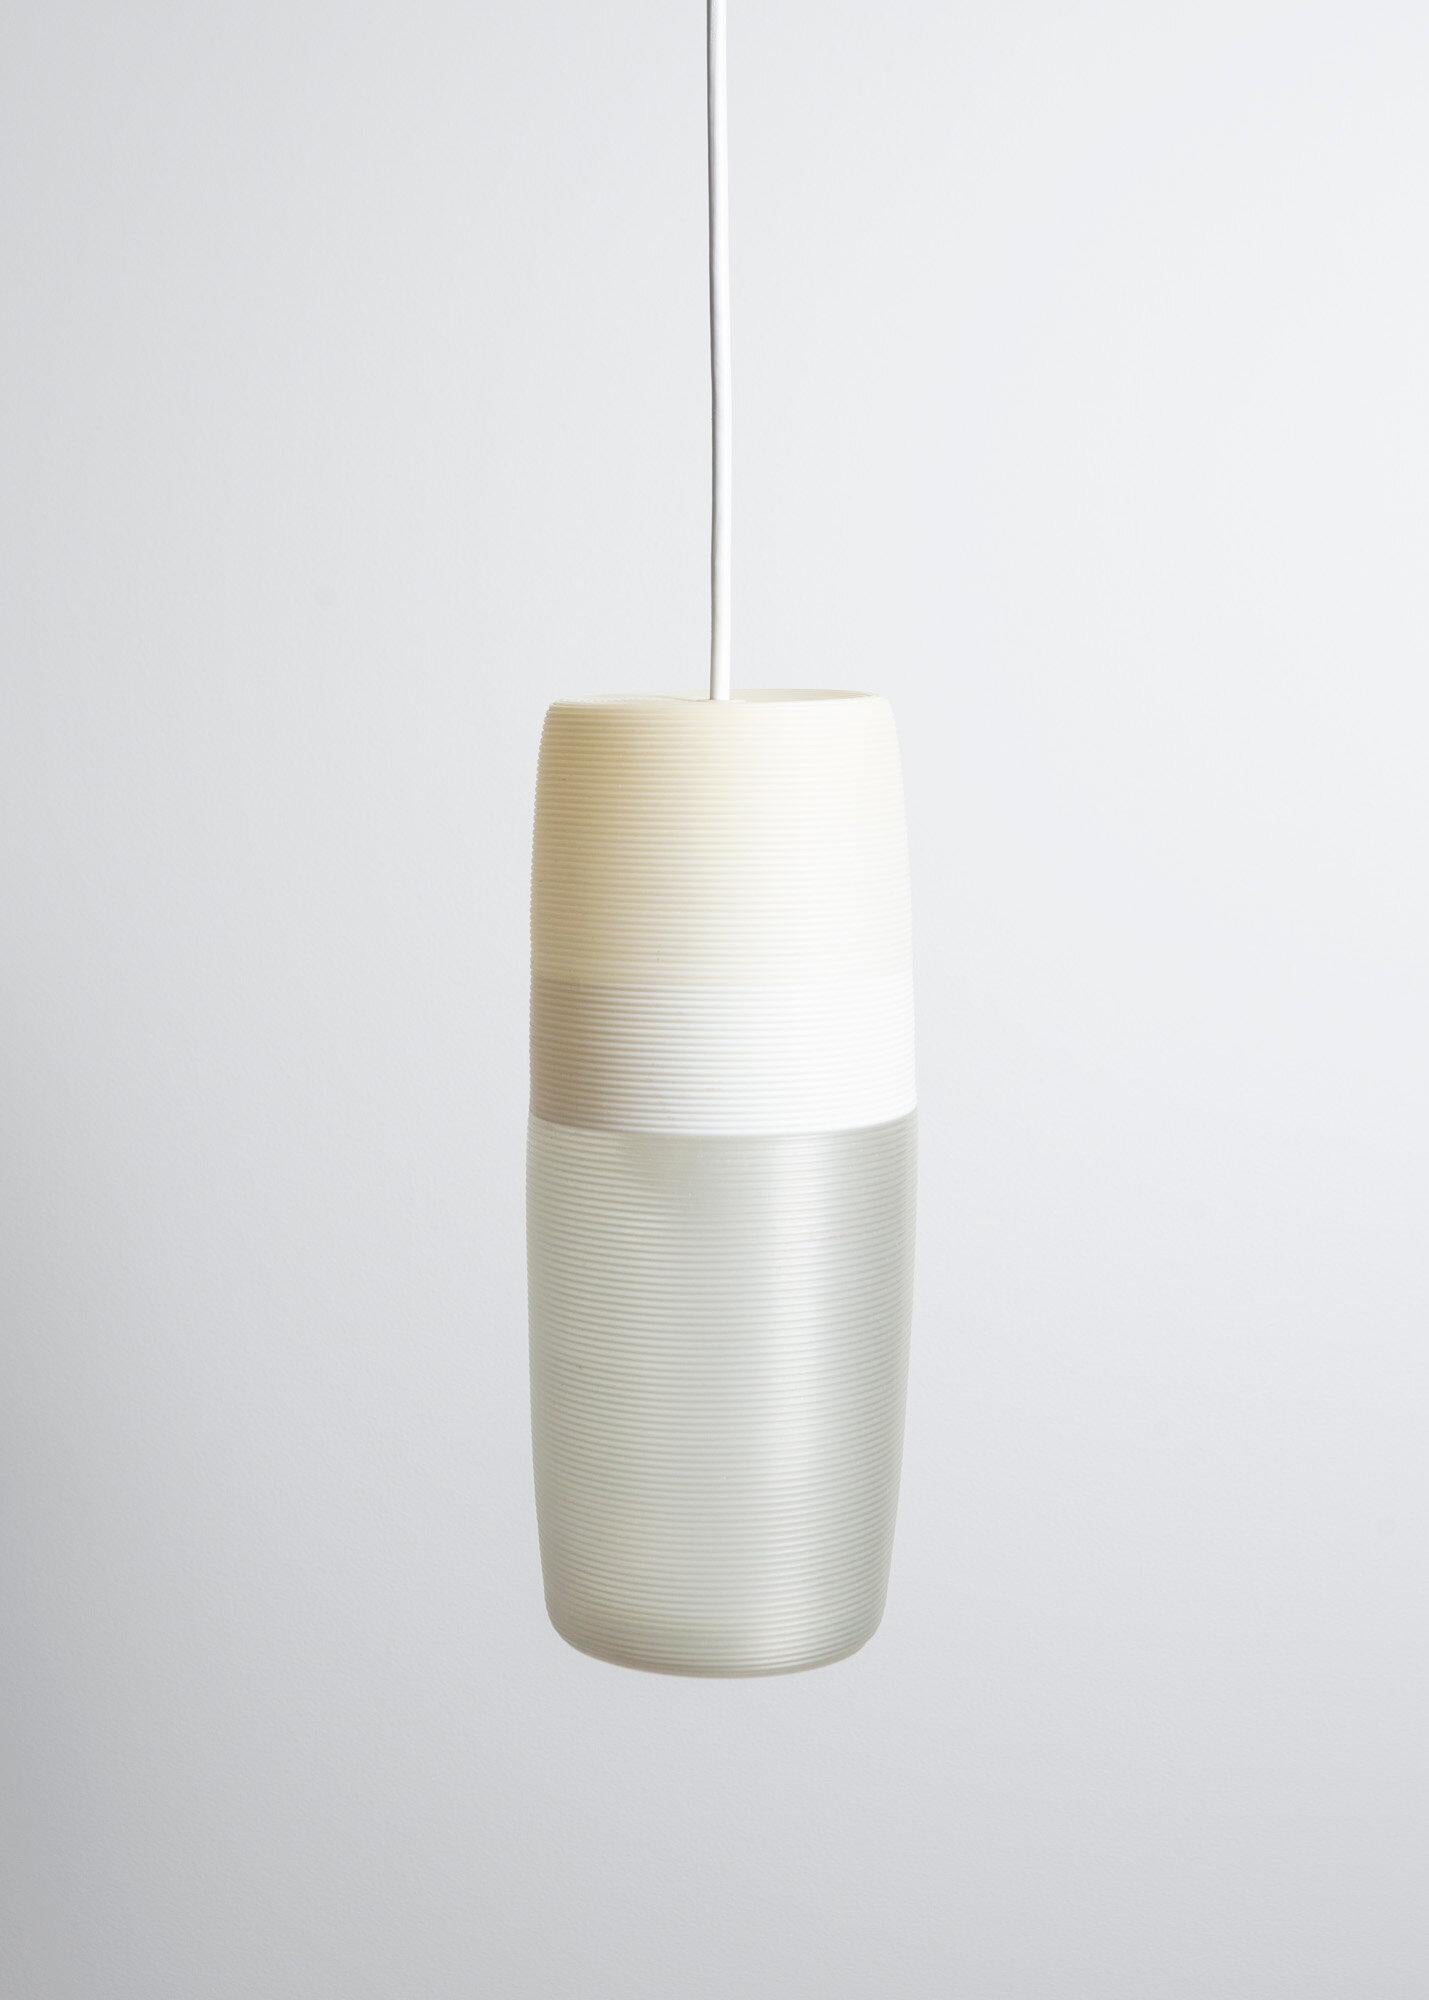 Rotaflex pendant lamp designed by John and Sylvia Reid and manufactured by Rotaflex in the 1950’. Tubular ribbed cellulose acetate shade. 60 watts E-26 medium based incandescent bulb recommended or higher if LED/CFL.
Rewired with E-26 Edison medium